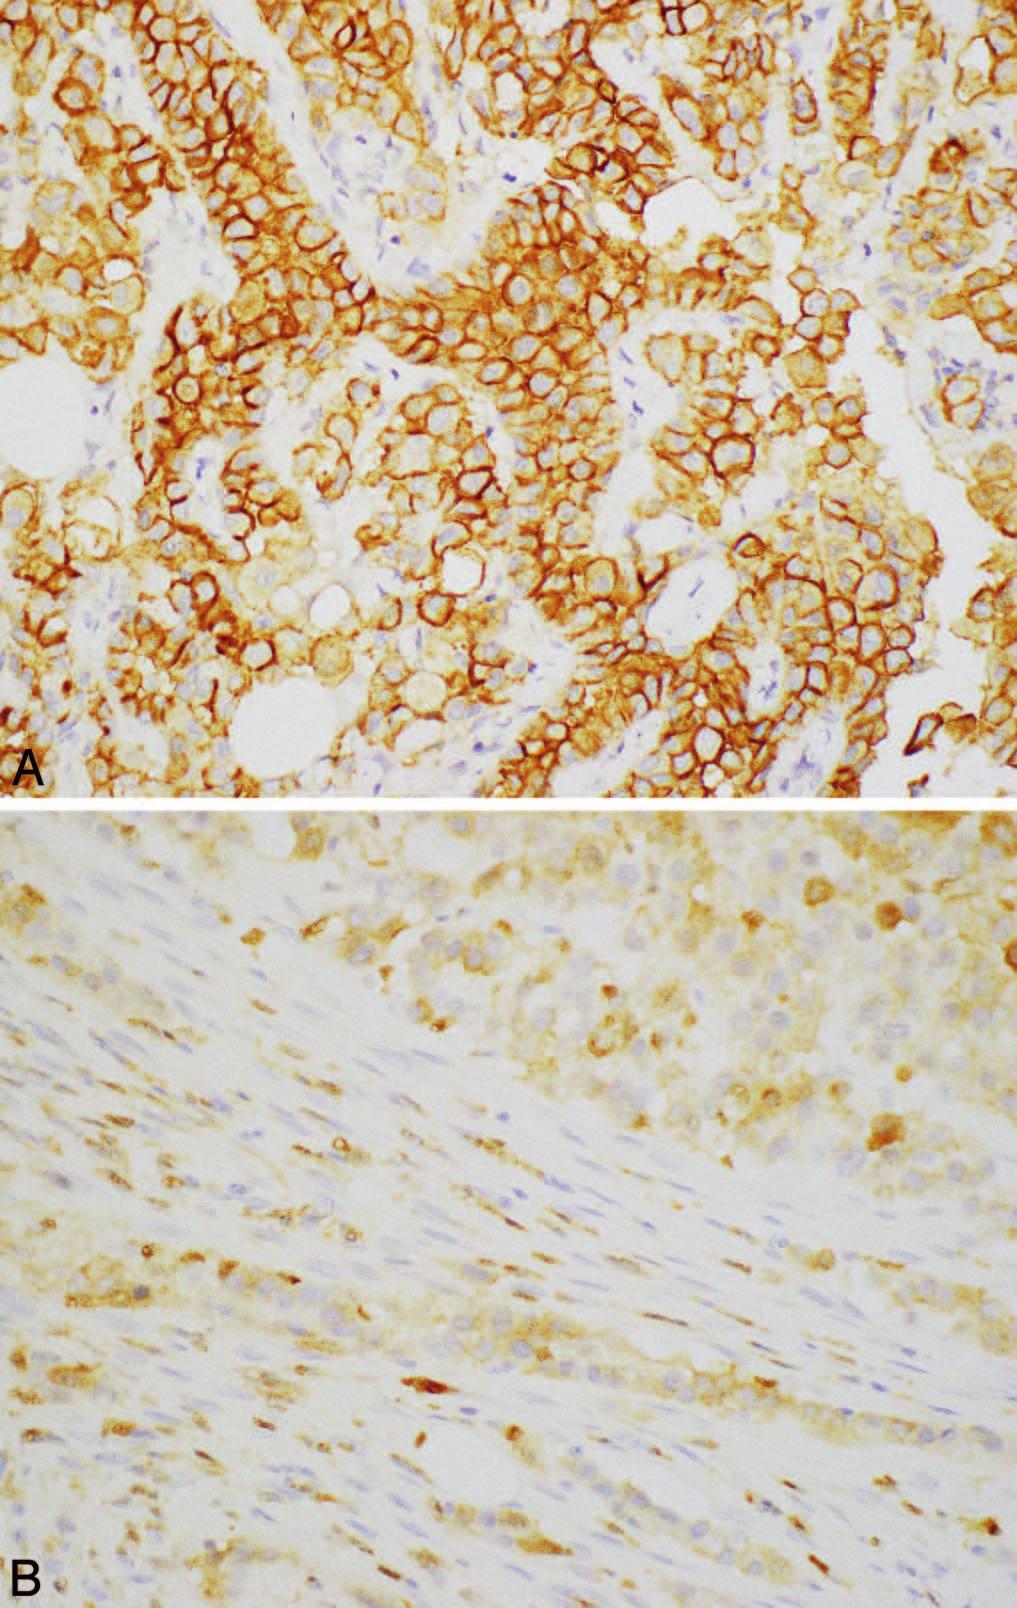 Figure 1. Mesothelin immunohistochemistry in peritoneal mesothelioma. A, Strong membranous immunoreactivity in peritoneal mesothelioma.